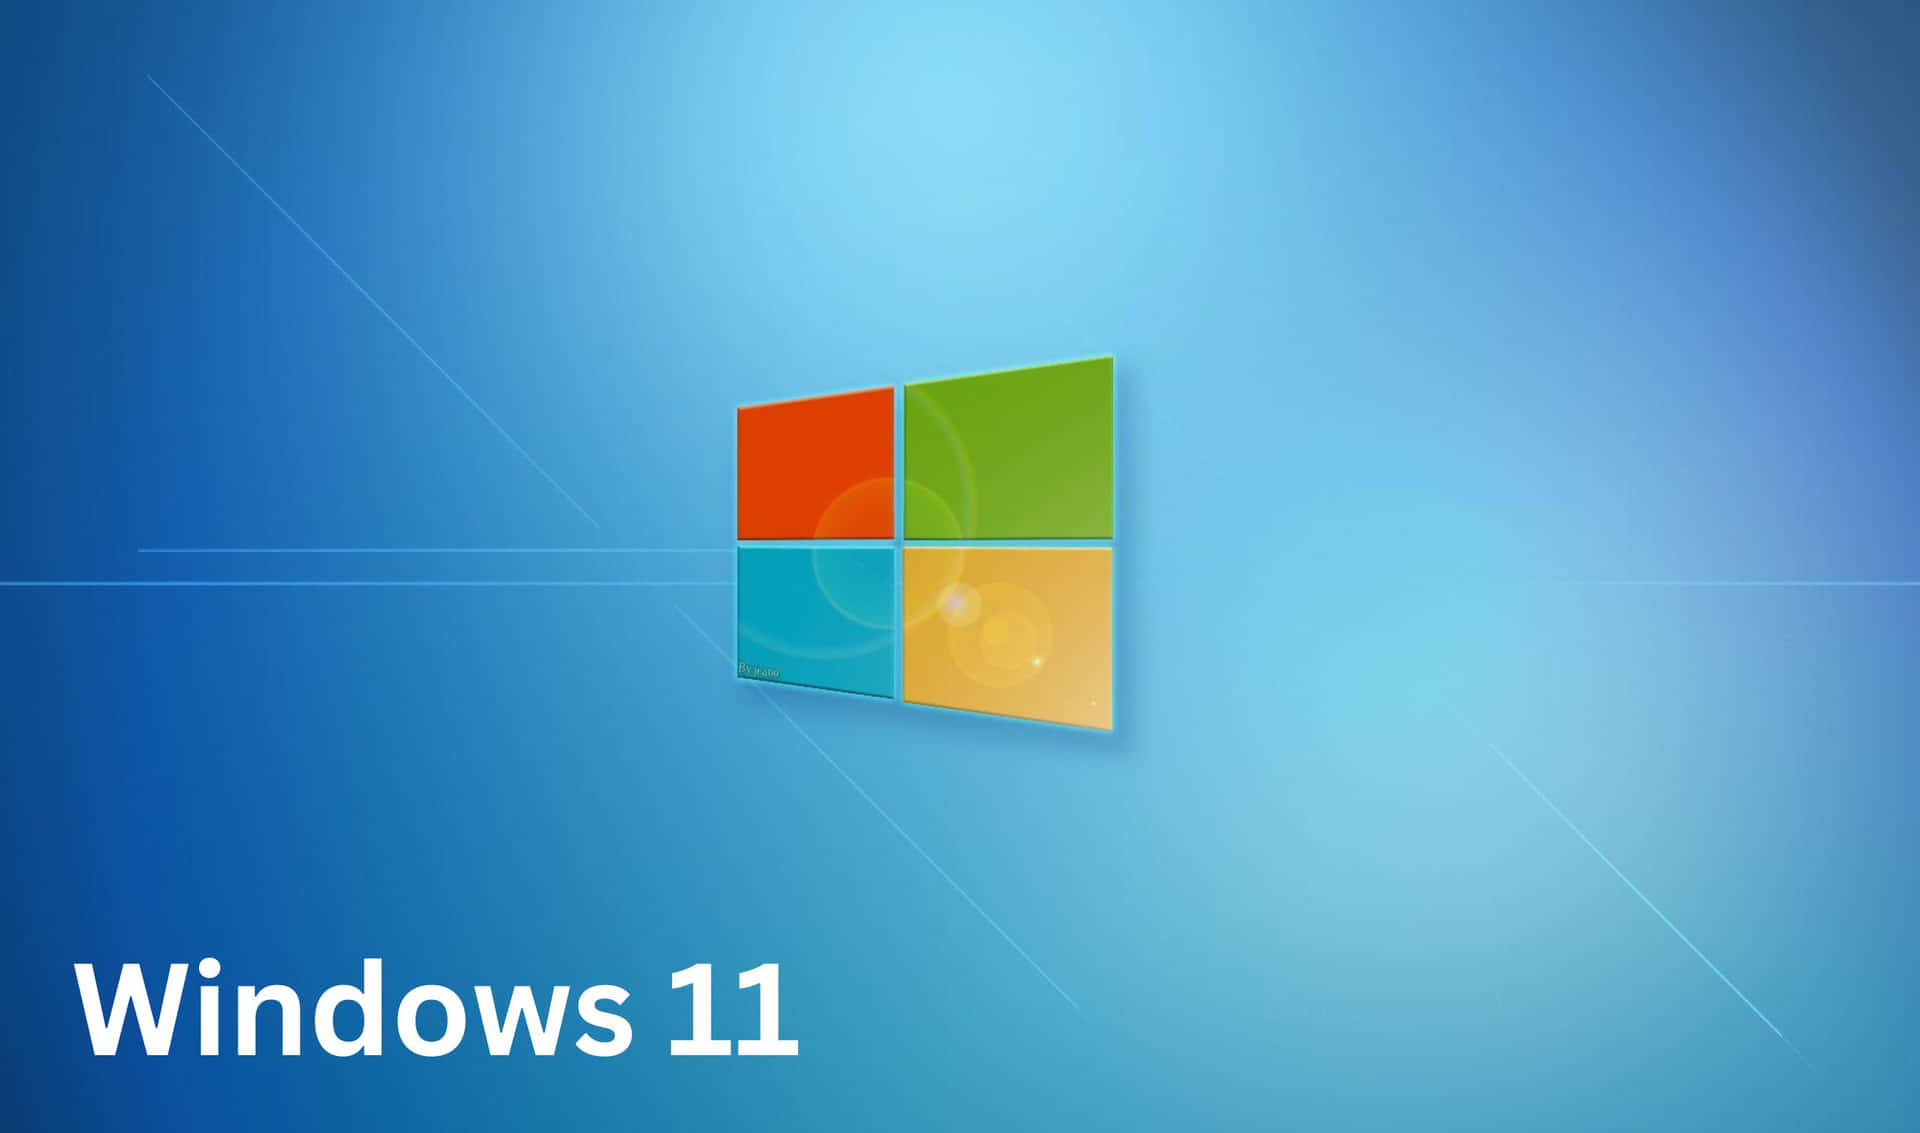 Get ready for the newest Microsoft operating system, Windows 11